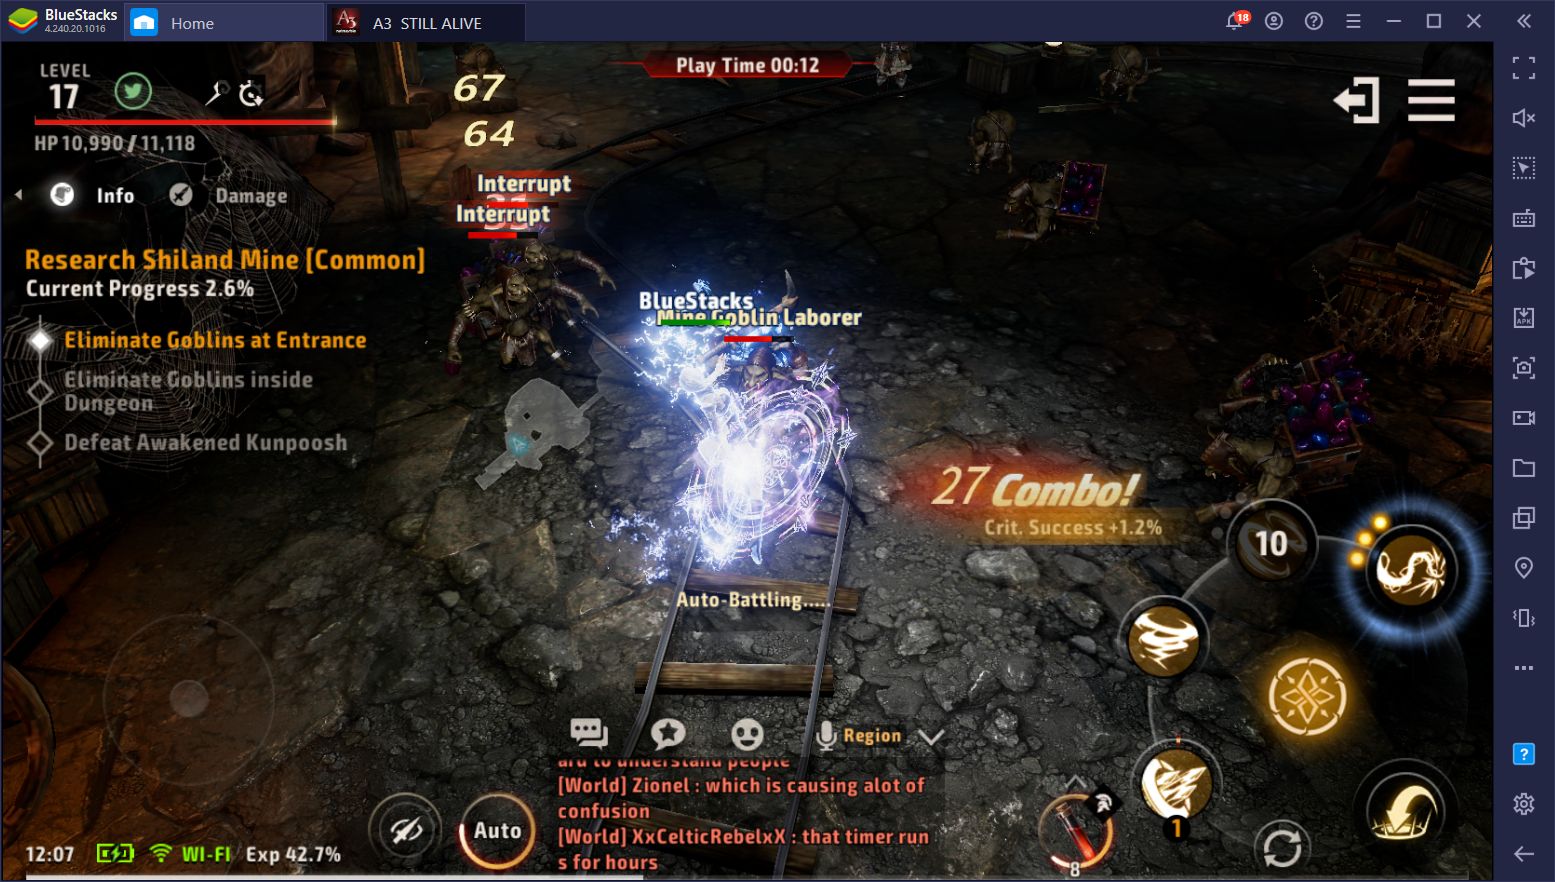 A3: Still Alive Tips, Tricks, and Strategies for Progressing in Netmarble’s new MMORPG